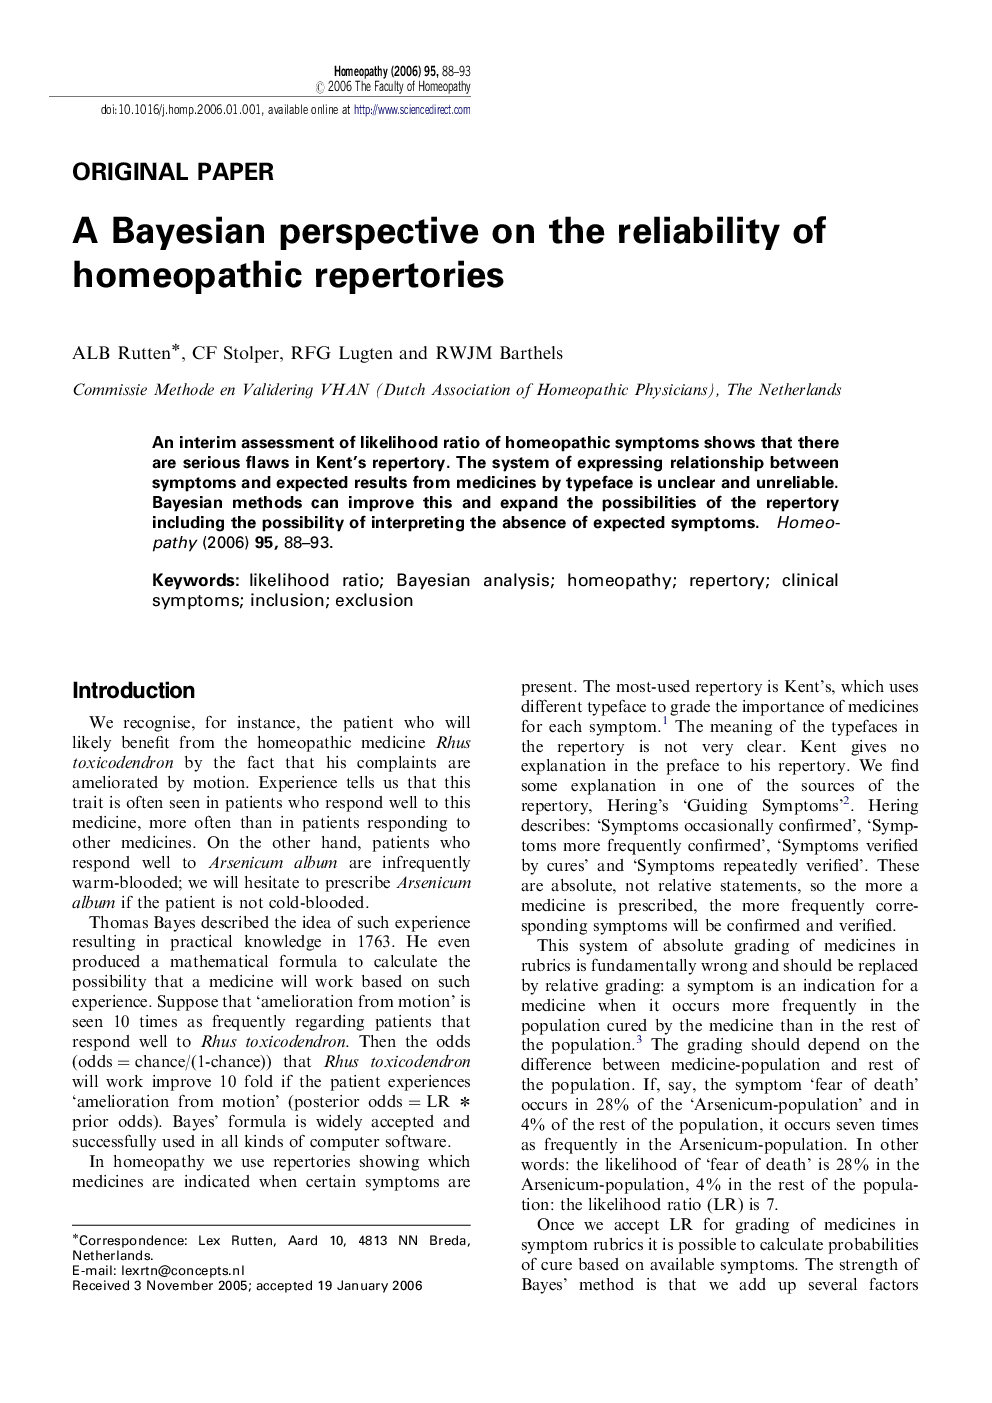 A Bayesian perspective on the reliability of homeopathic repertories